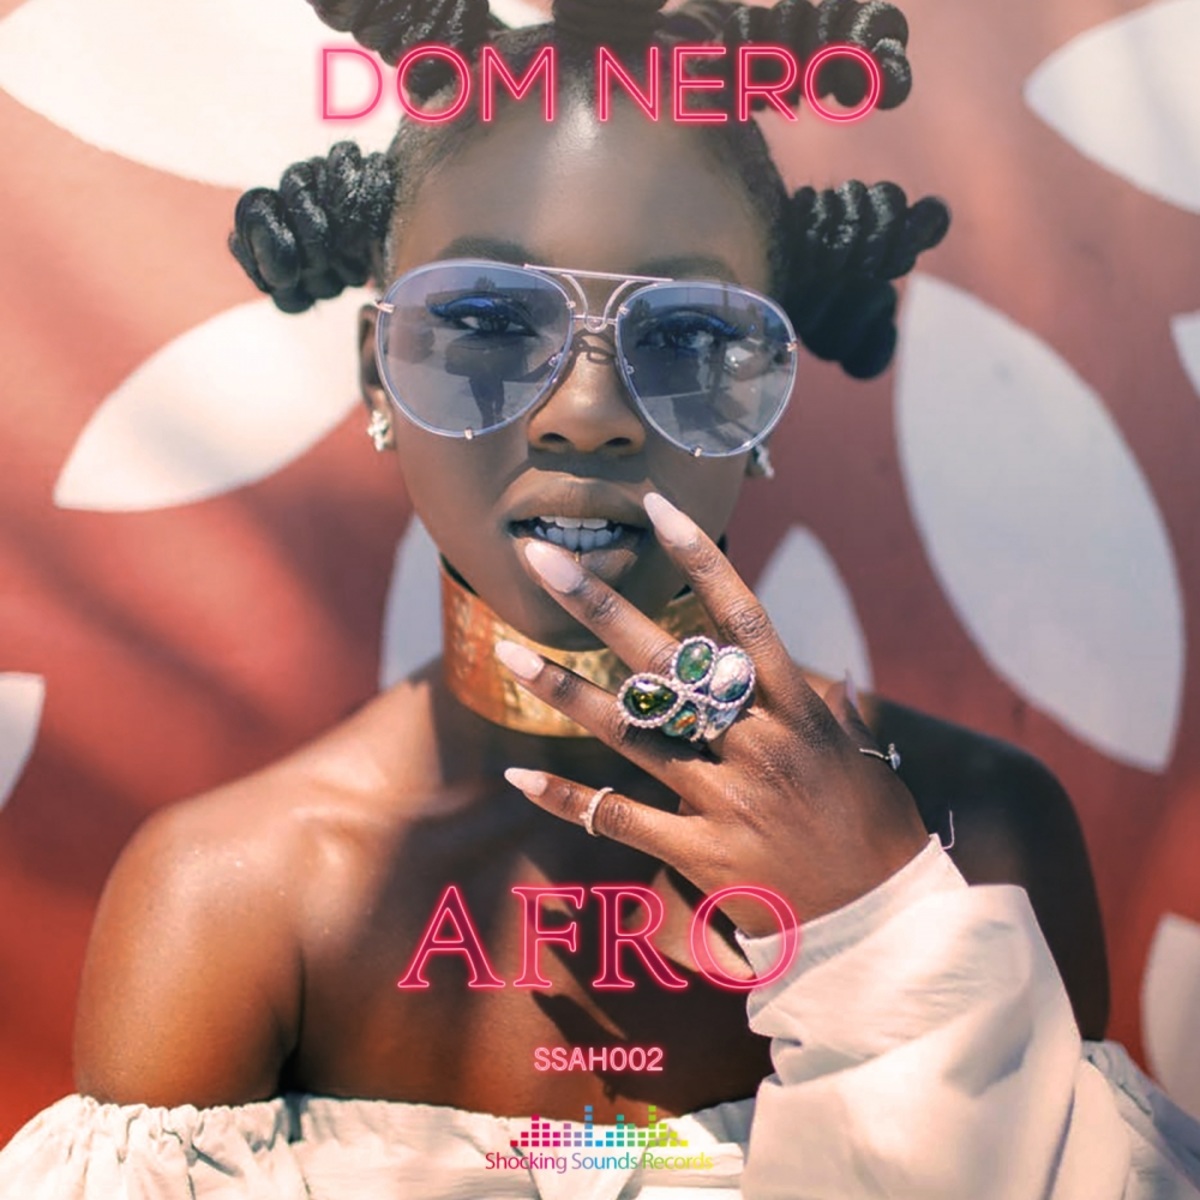 Dom Nero - Afro / Shocking Sounds Records